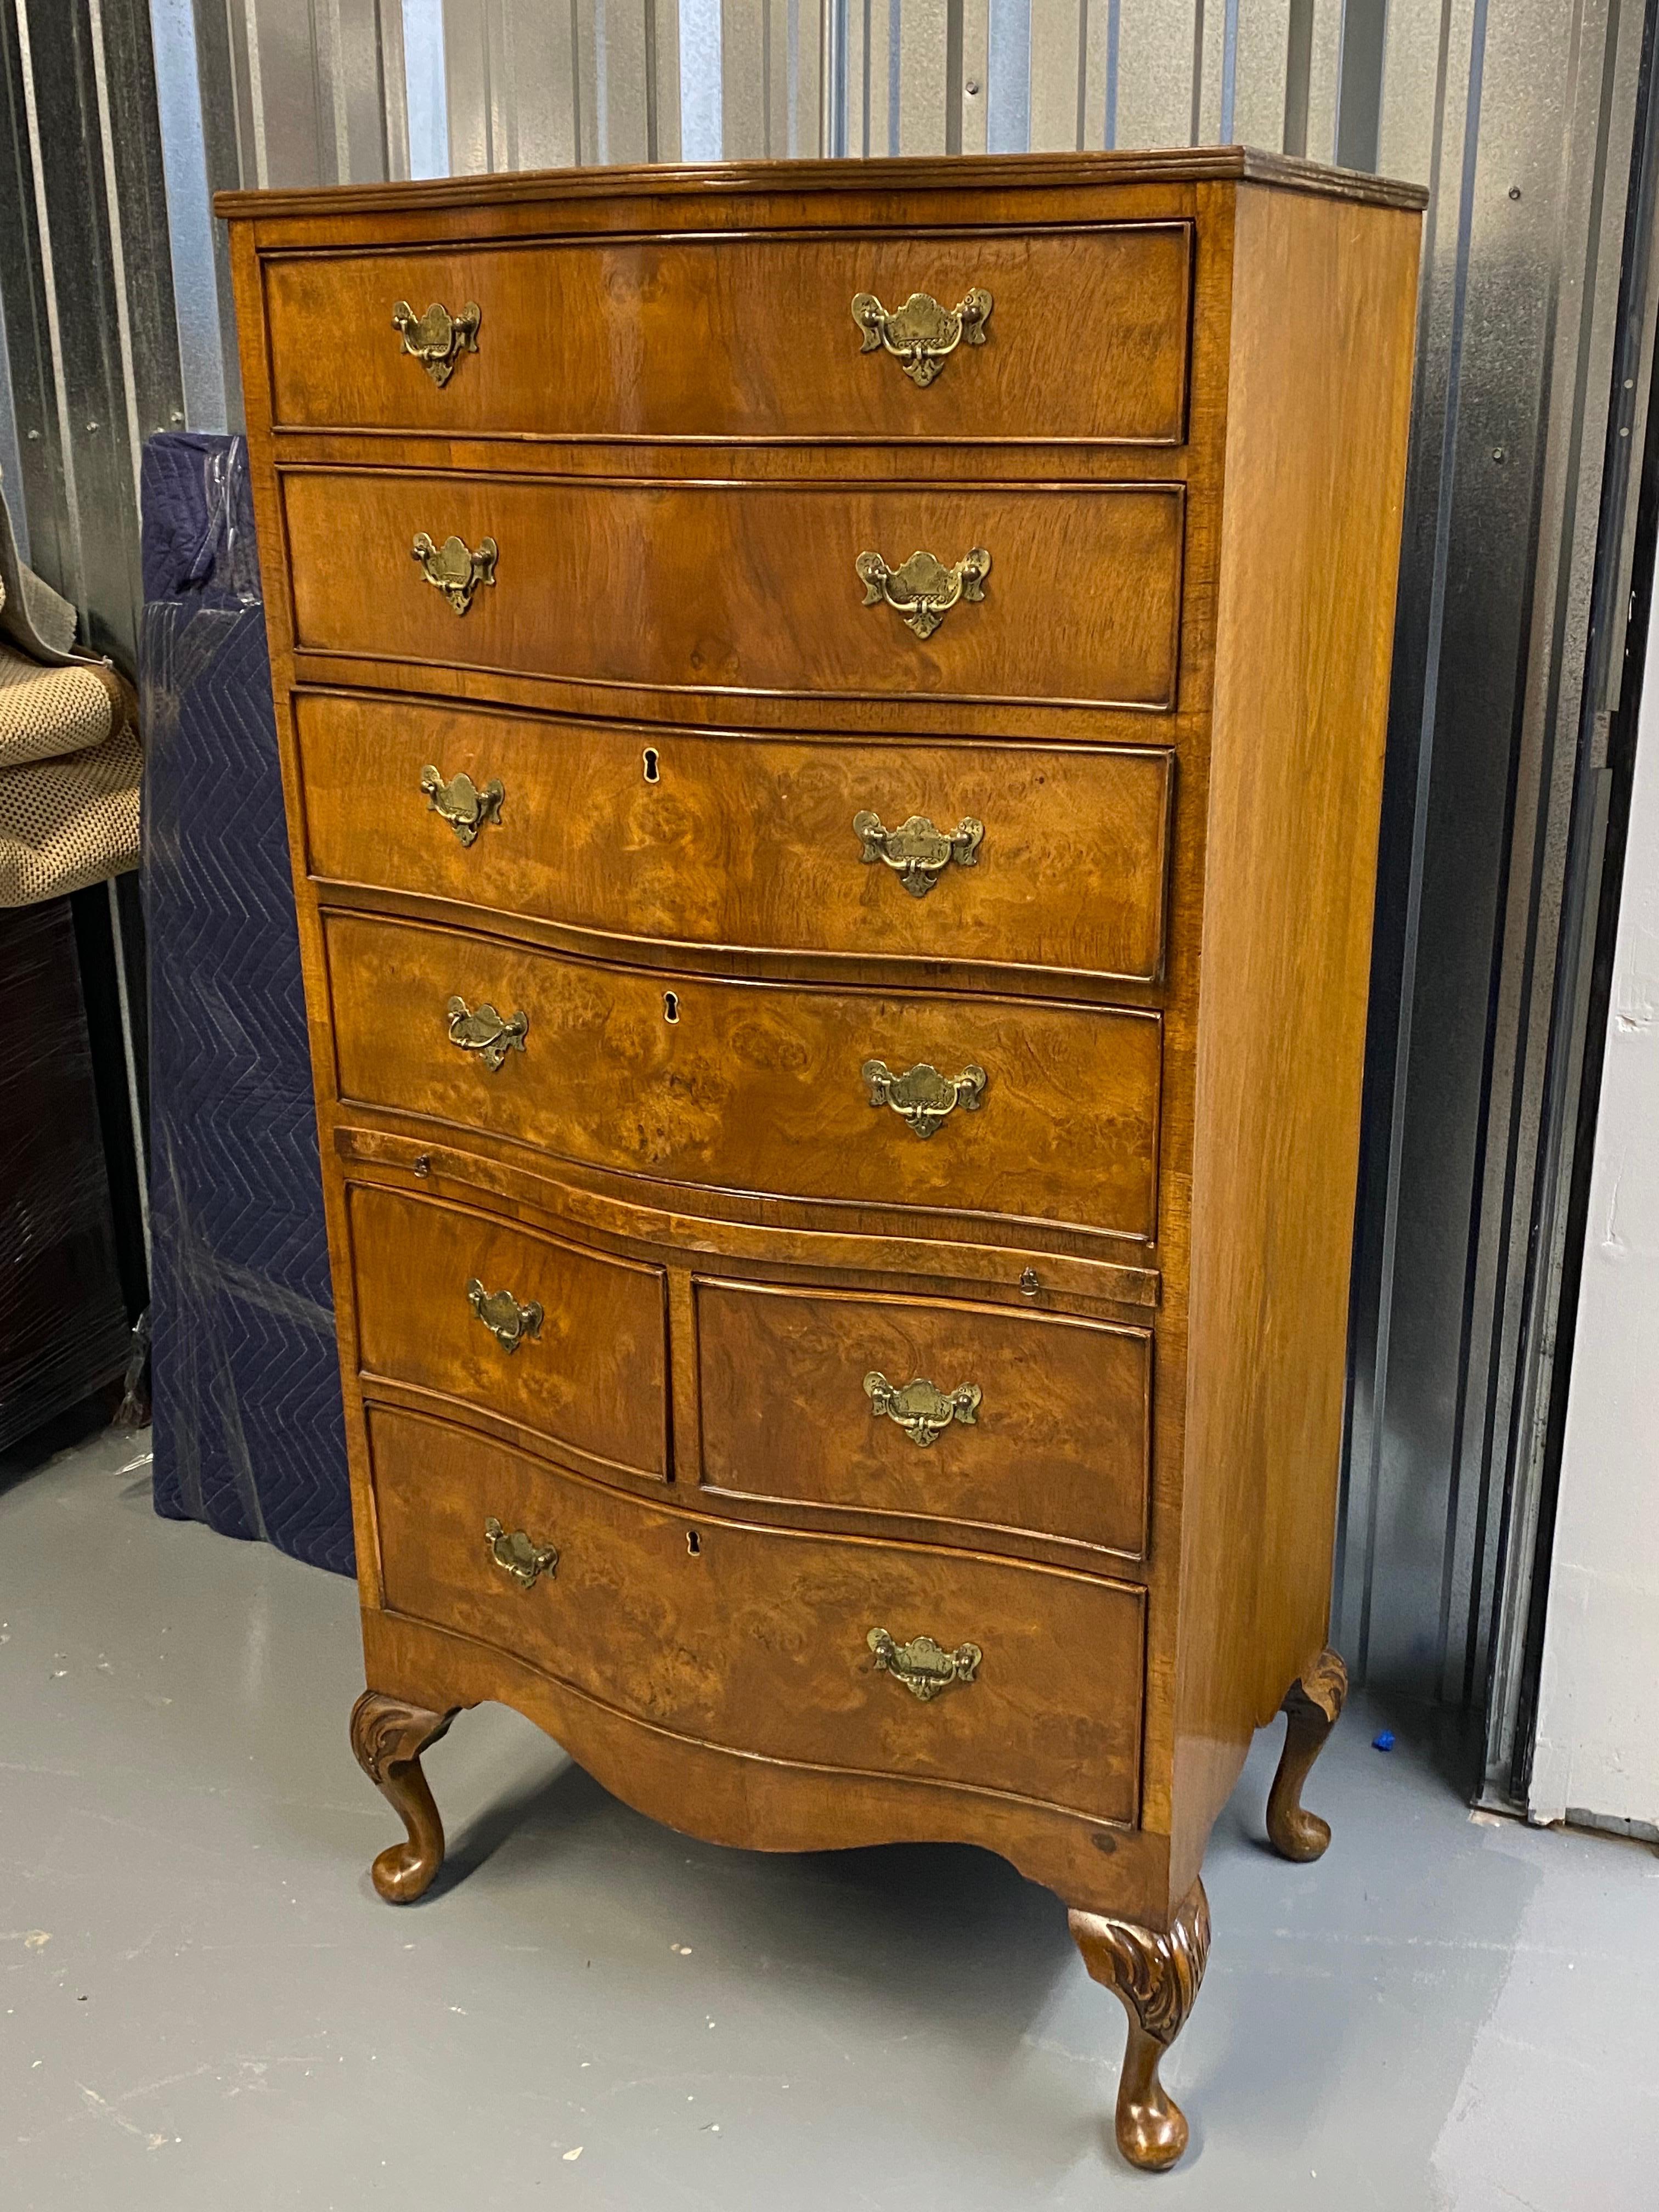 Georgian Style Serpentine Front Tall Chest of Drawers, 20th Century
A lovely tall chest with serpentine (curved) front, tall chest of drawers on carved cabriole legs. Wood veneered. Four single drawers, then a pull out shelf, followed by two smaller